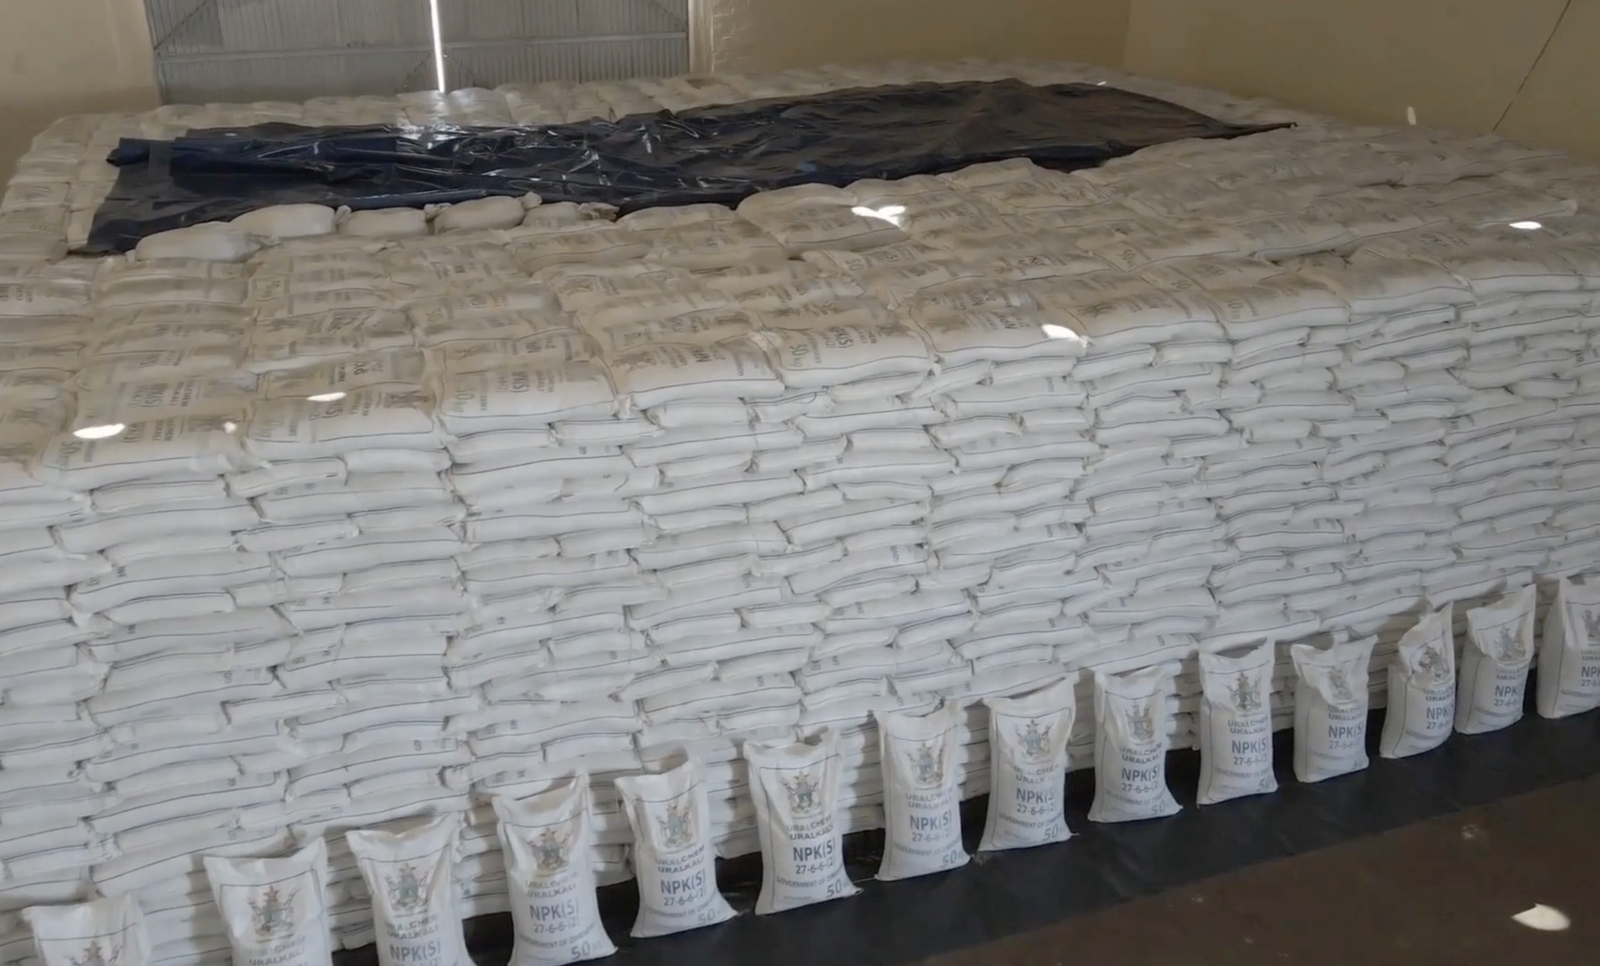 Russia Delivers Over 23000 Tons of Free Fertilizer to Zimbabwe to Combat Food Crisis | Report Focus News